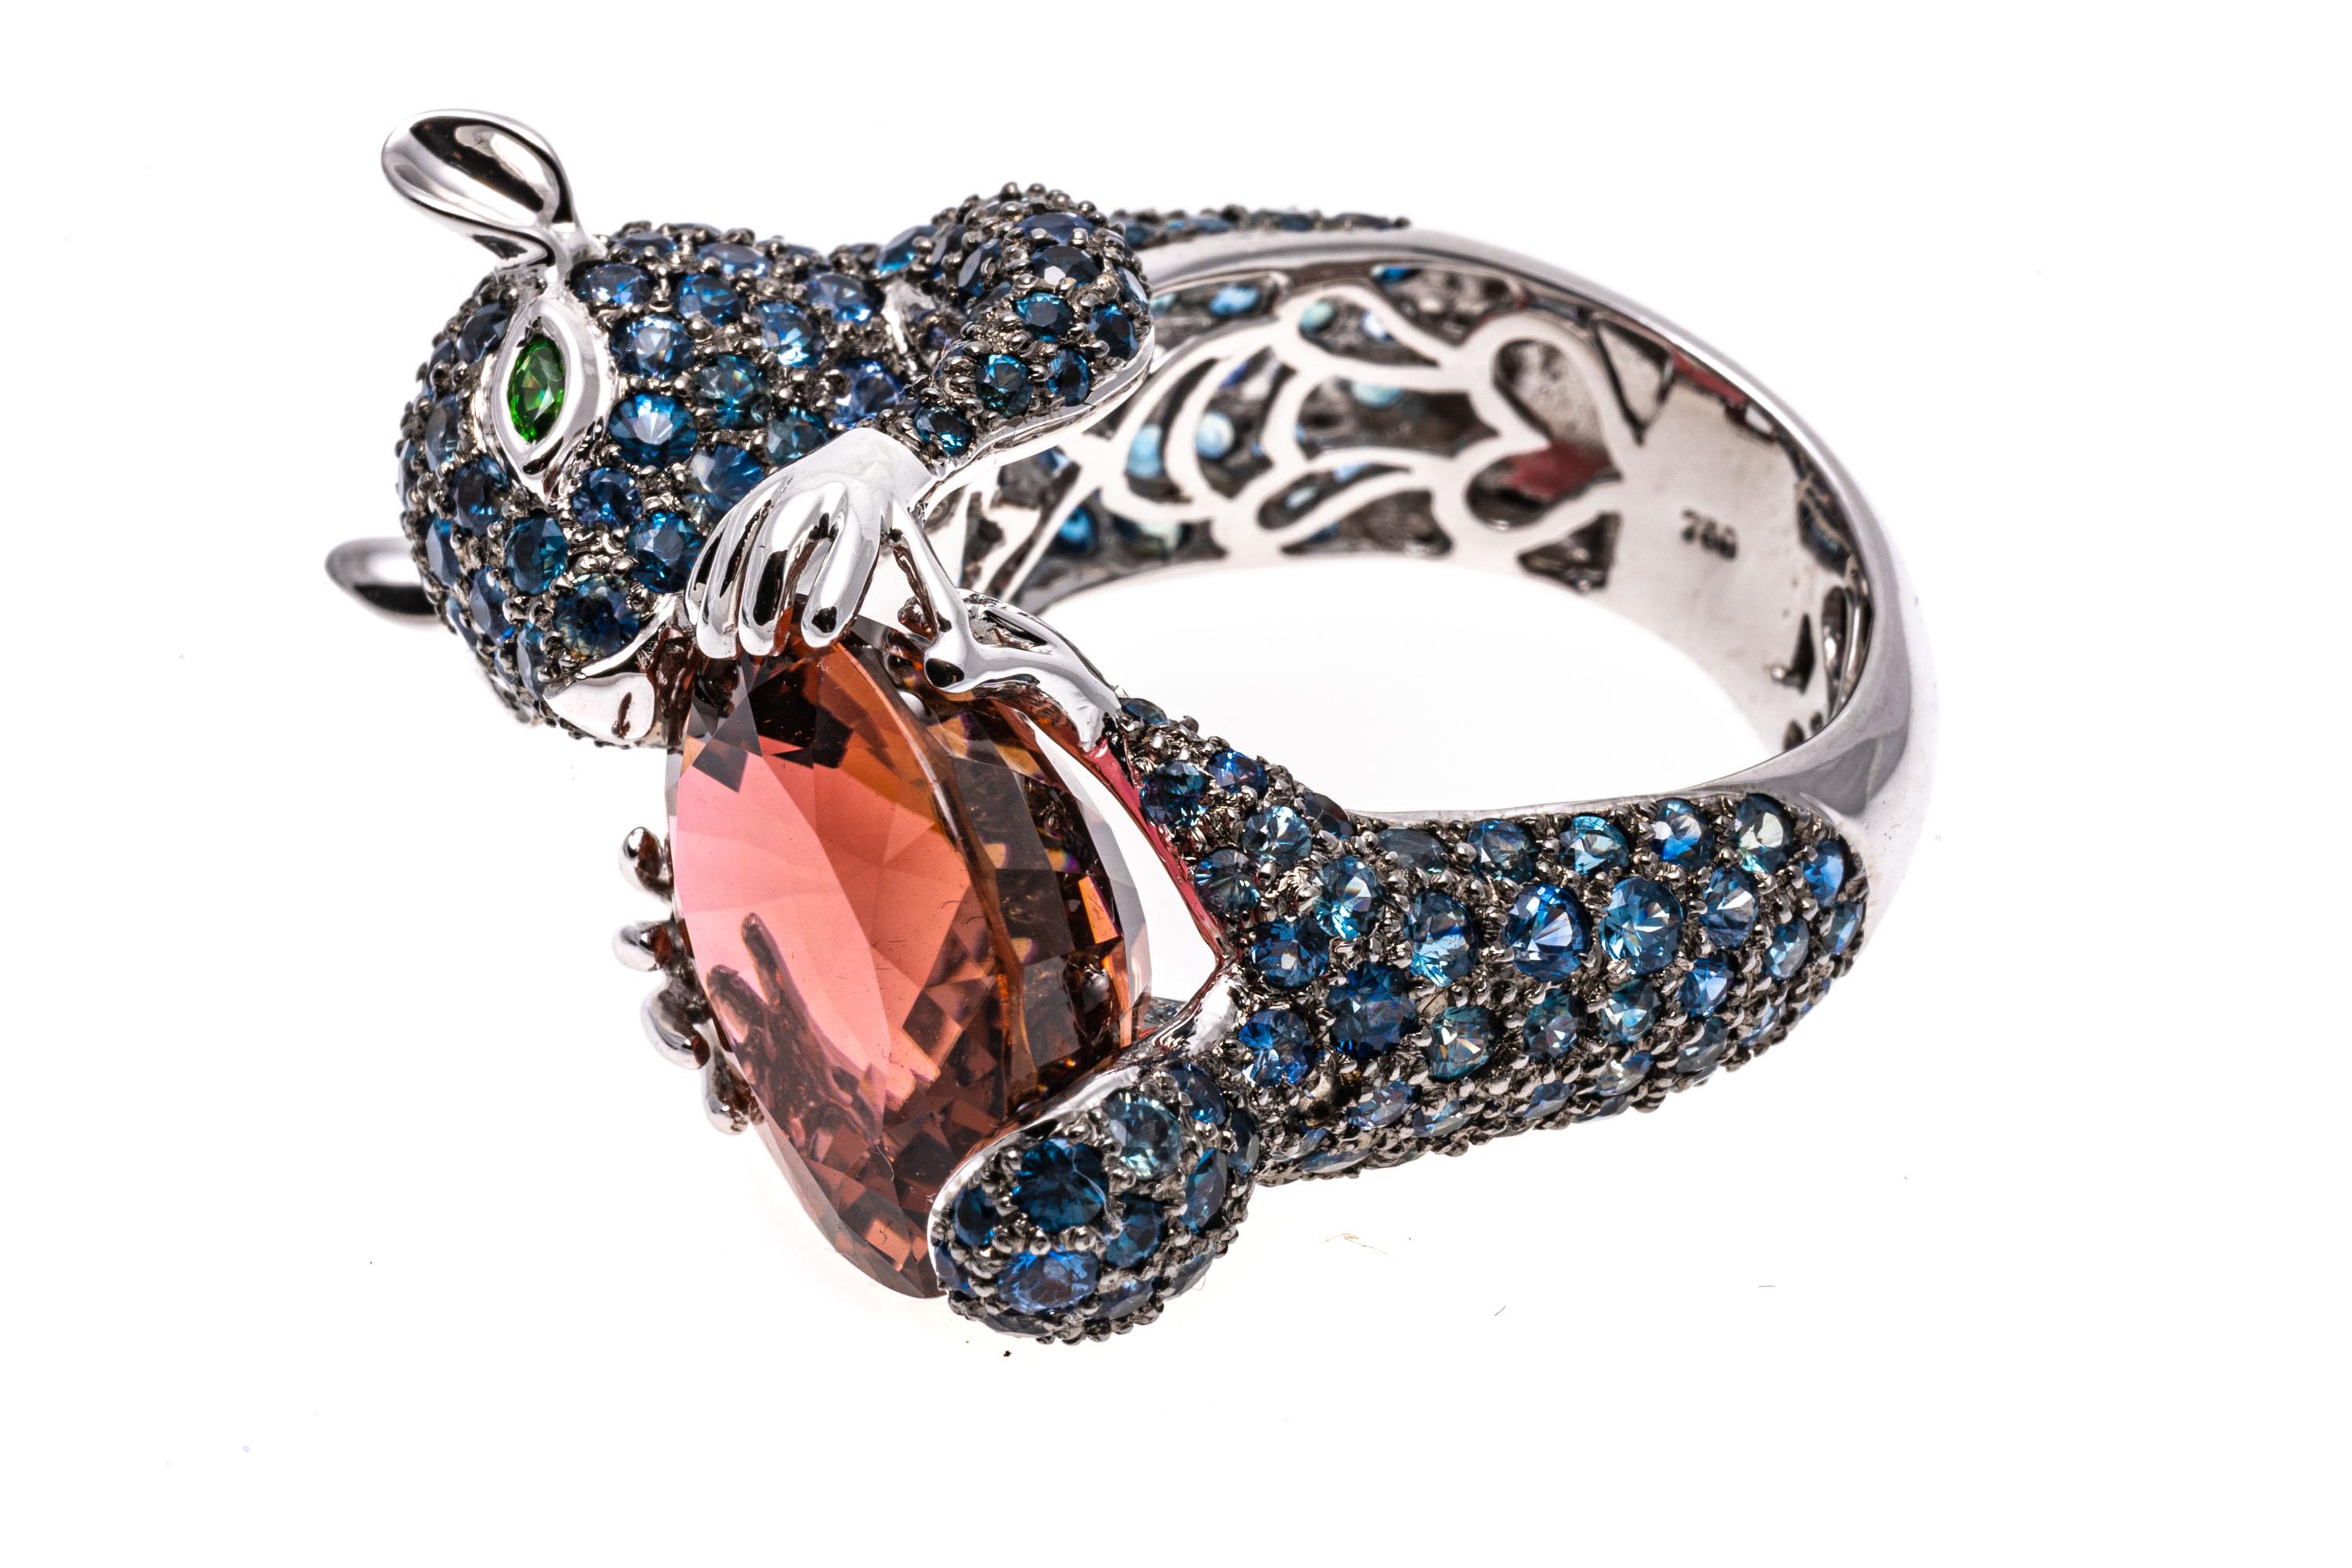 18k White Gold Pave Sapphire Squirrel Ring, Holding A Tourmaline, TCW 3